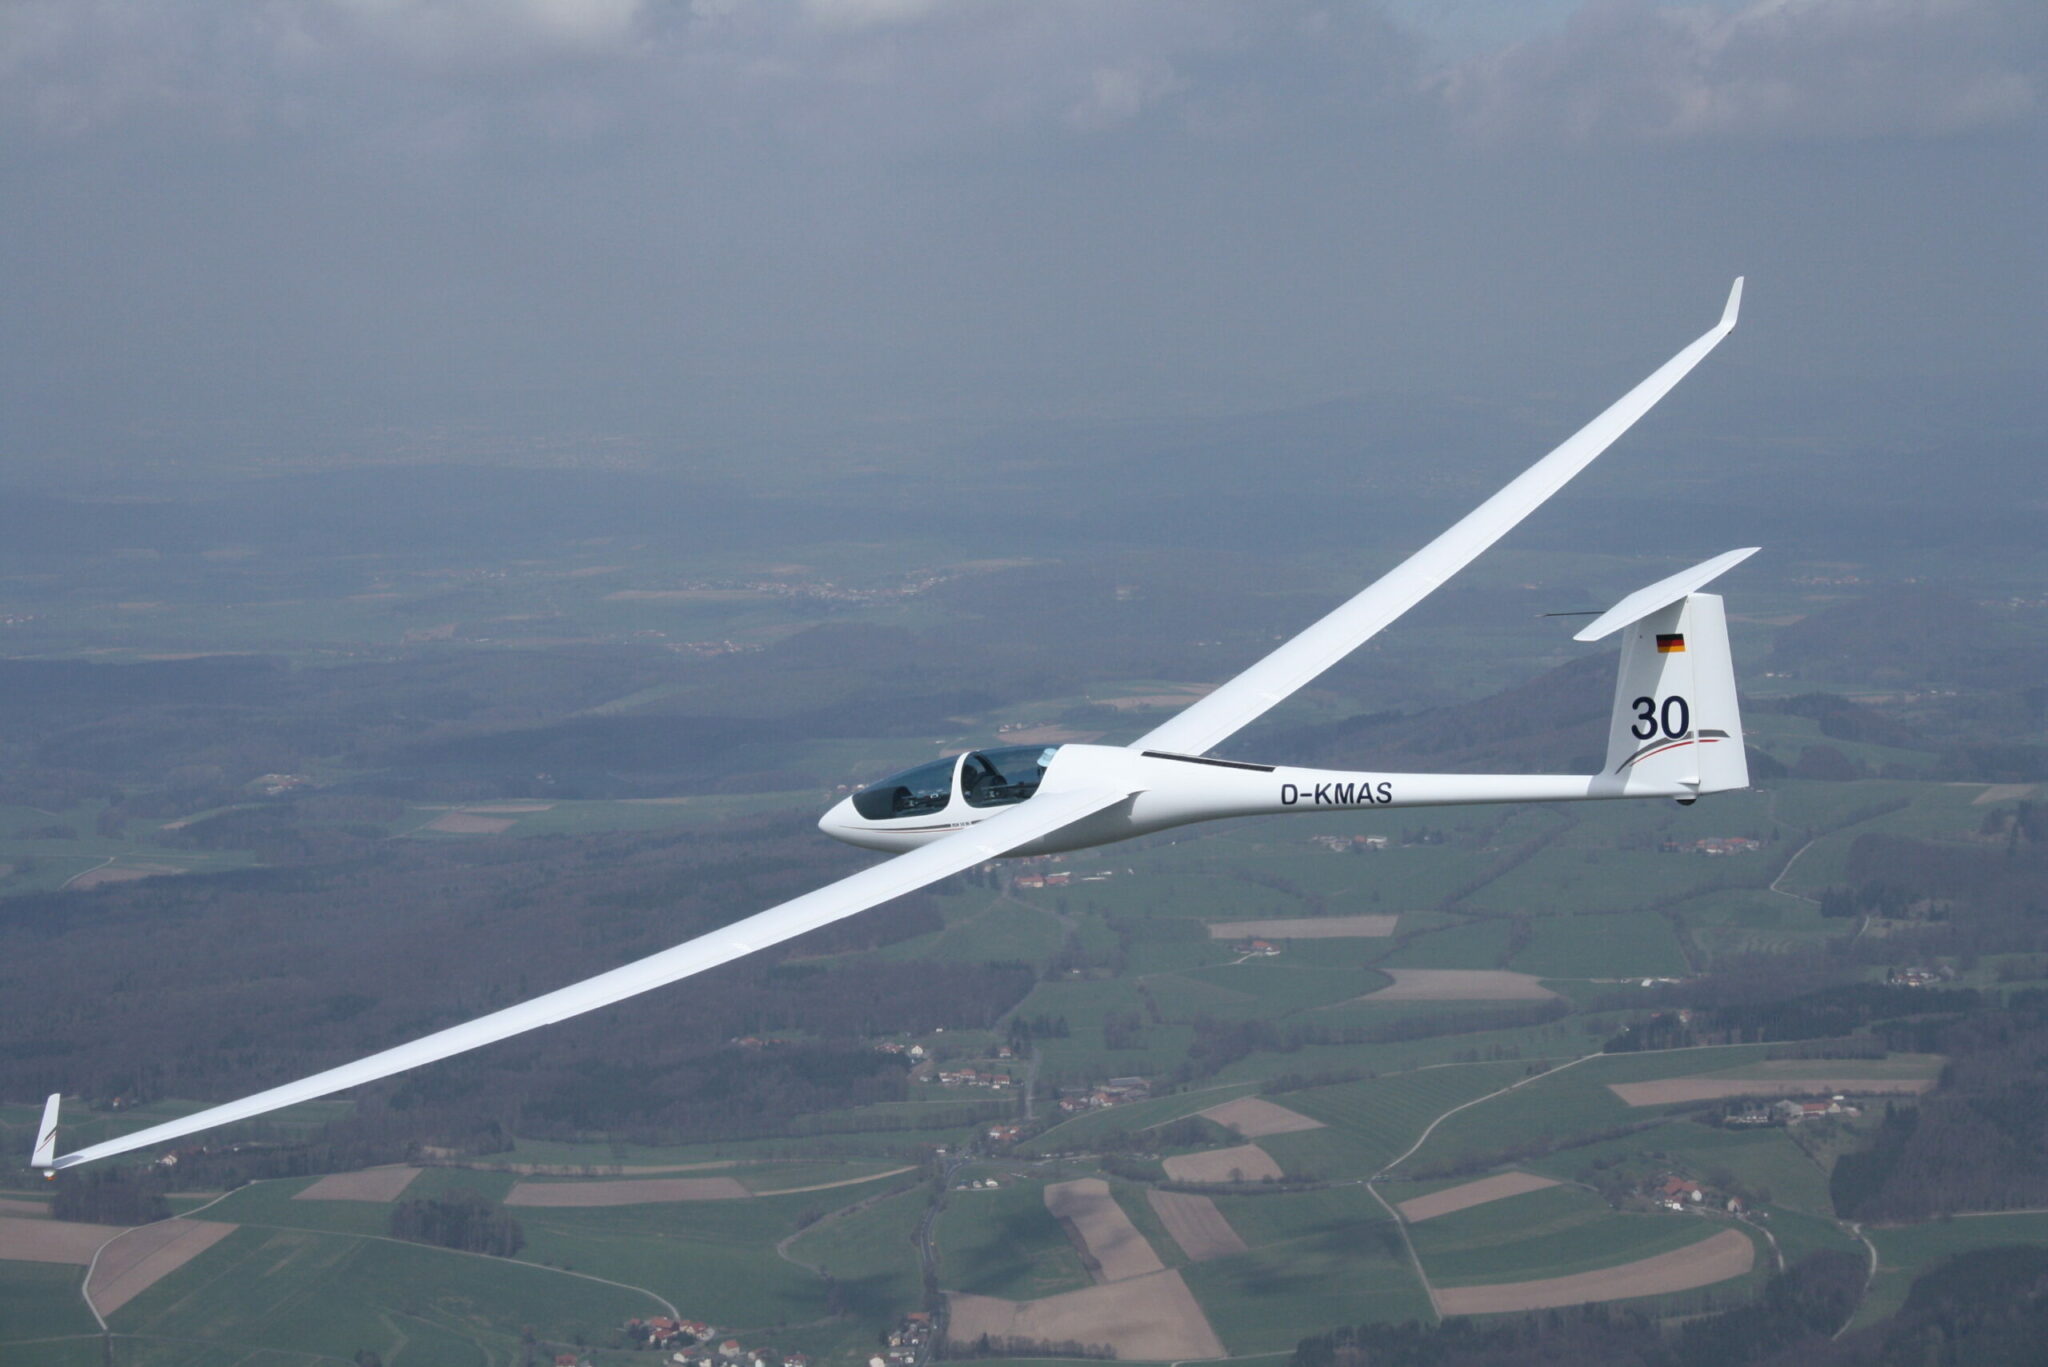 what was the longest glider flight in the world scaled